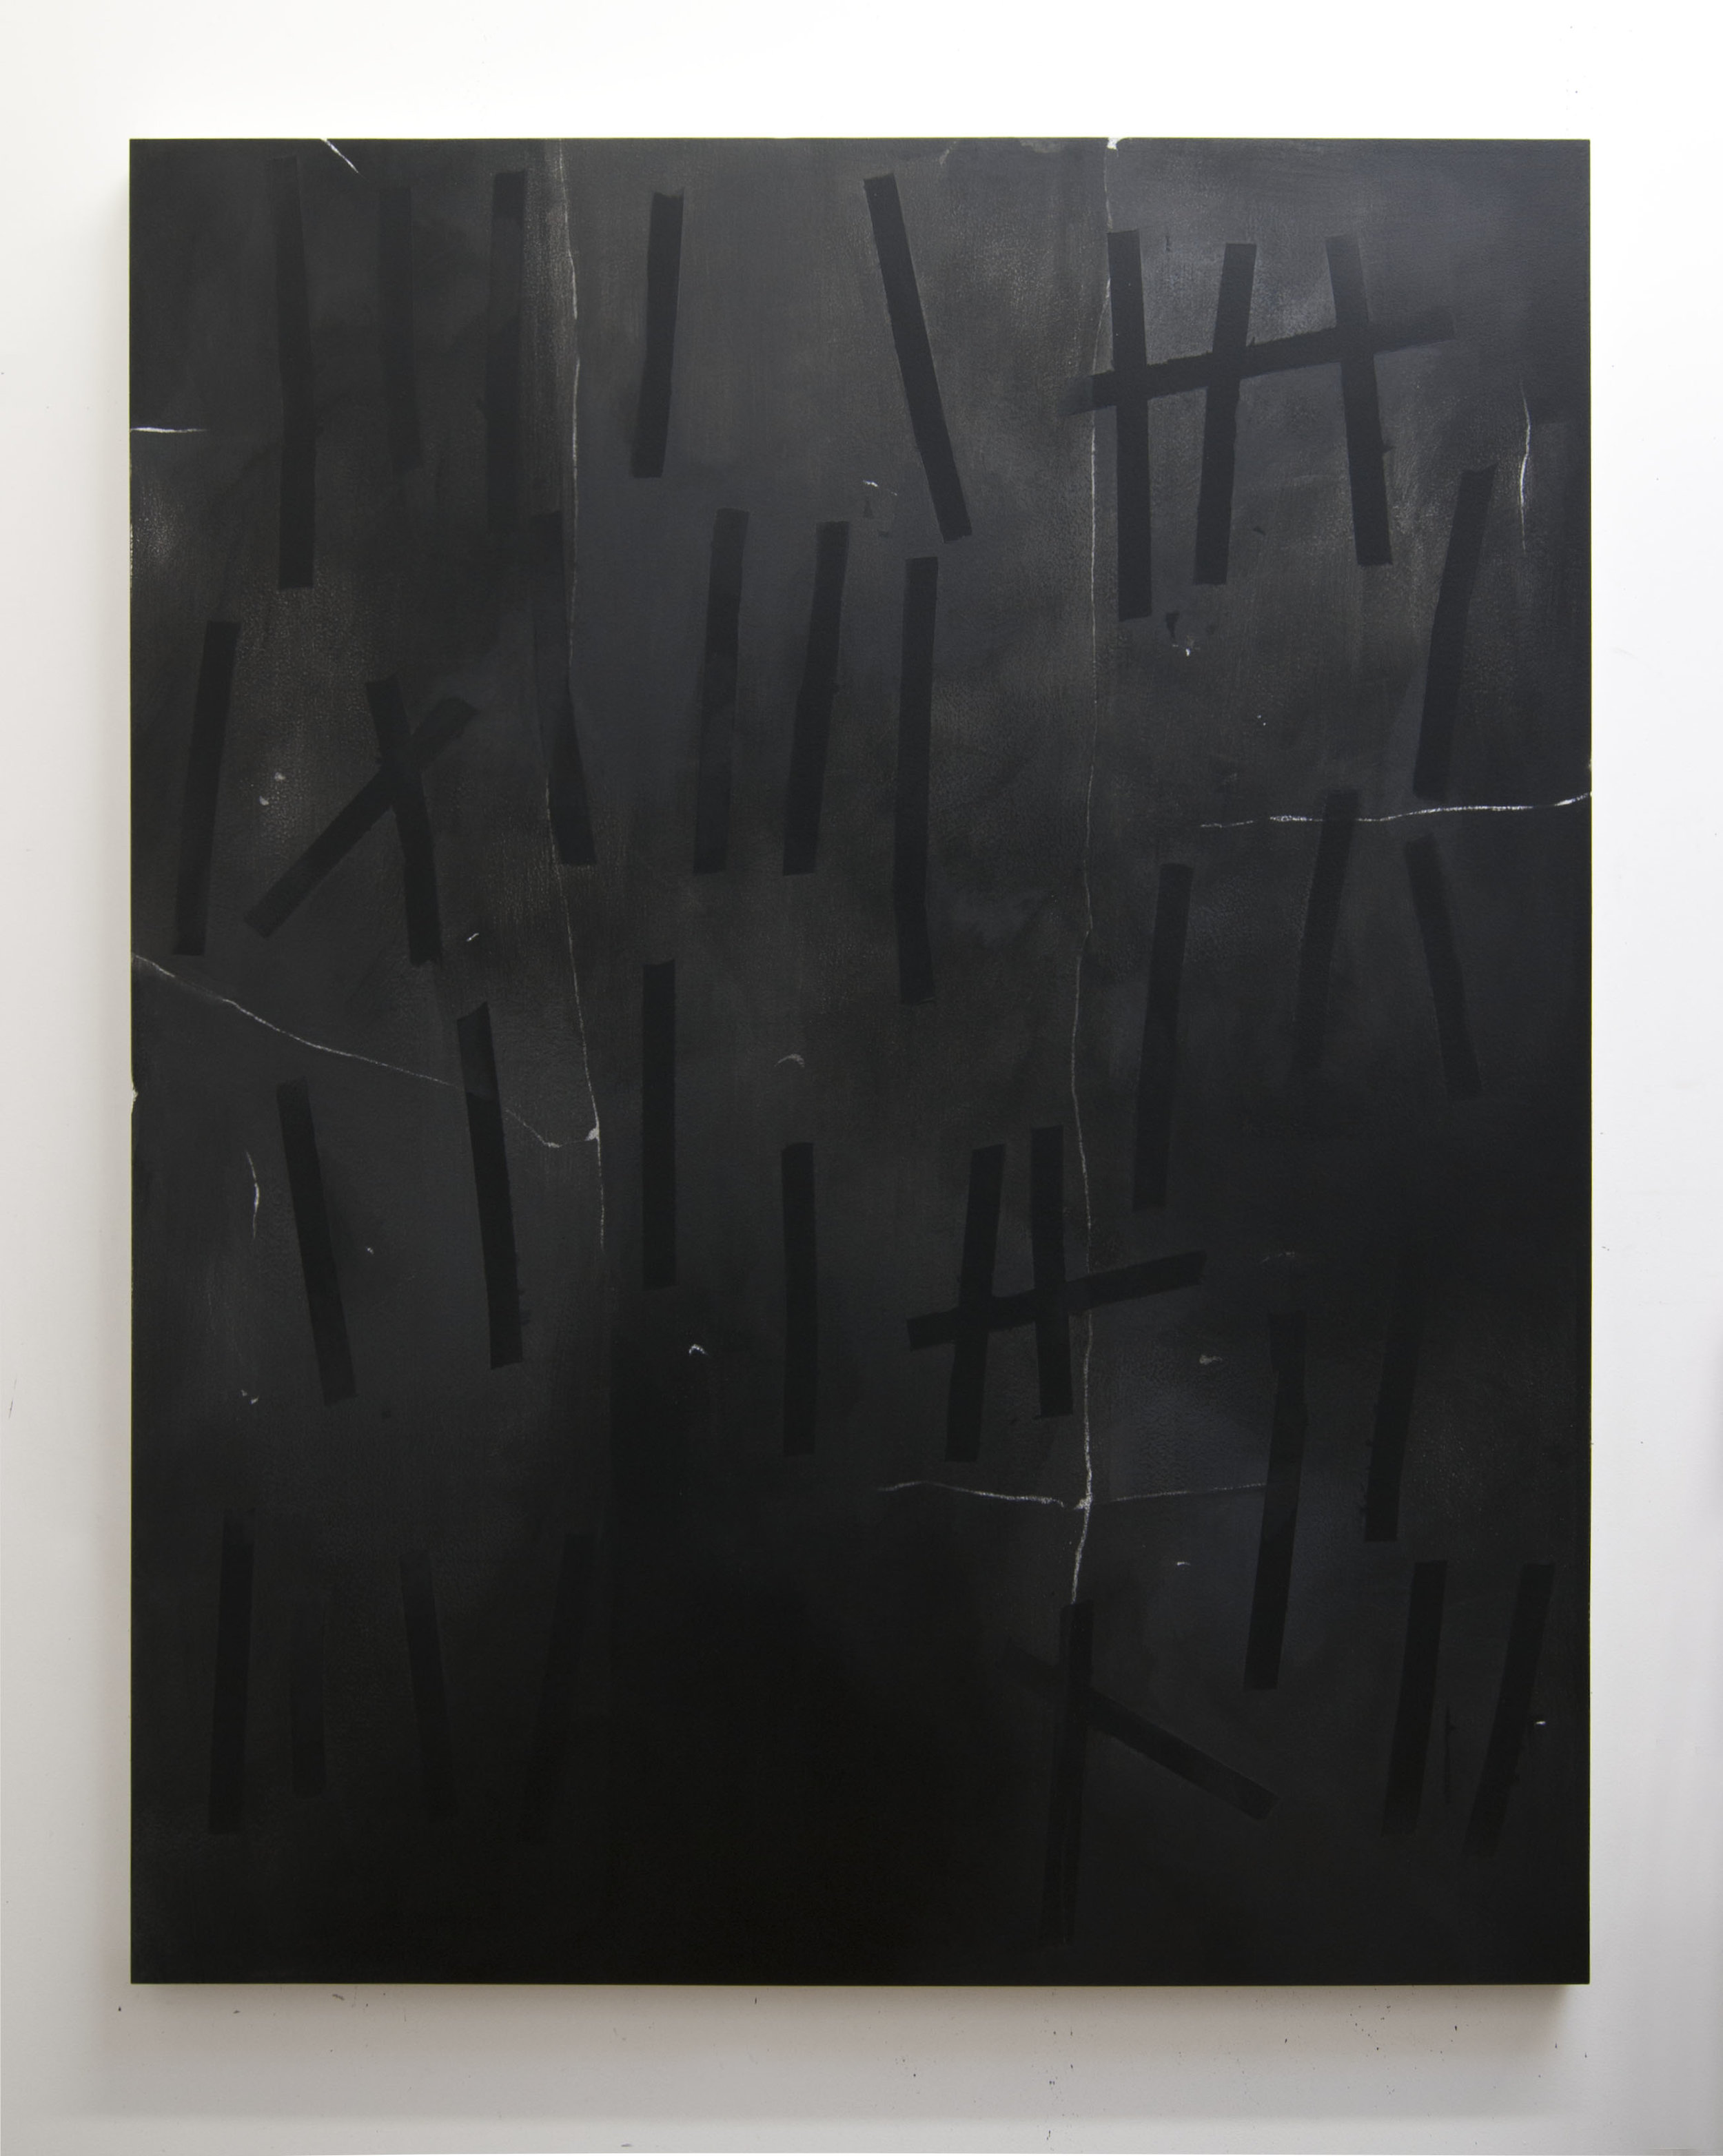  Cold Numbers, 2015  Acrylic on panel, 56 x 44 inches 